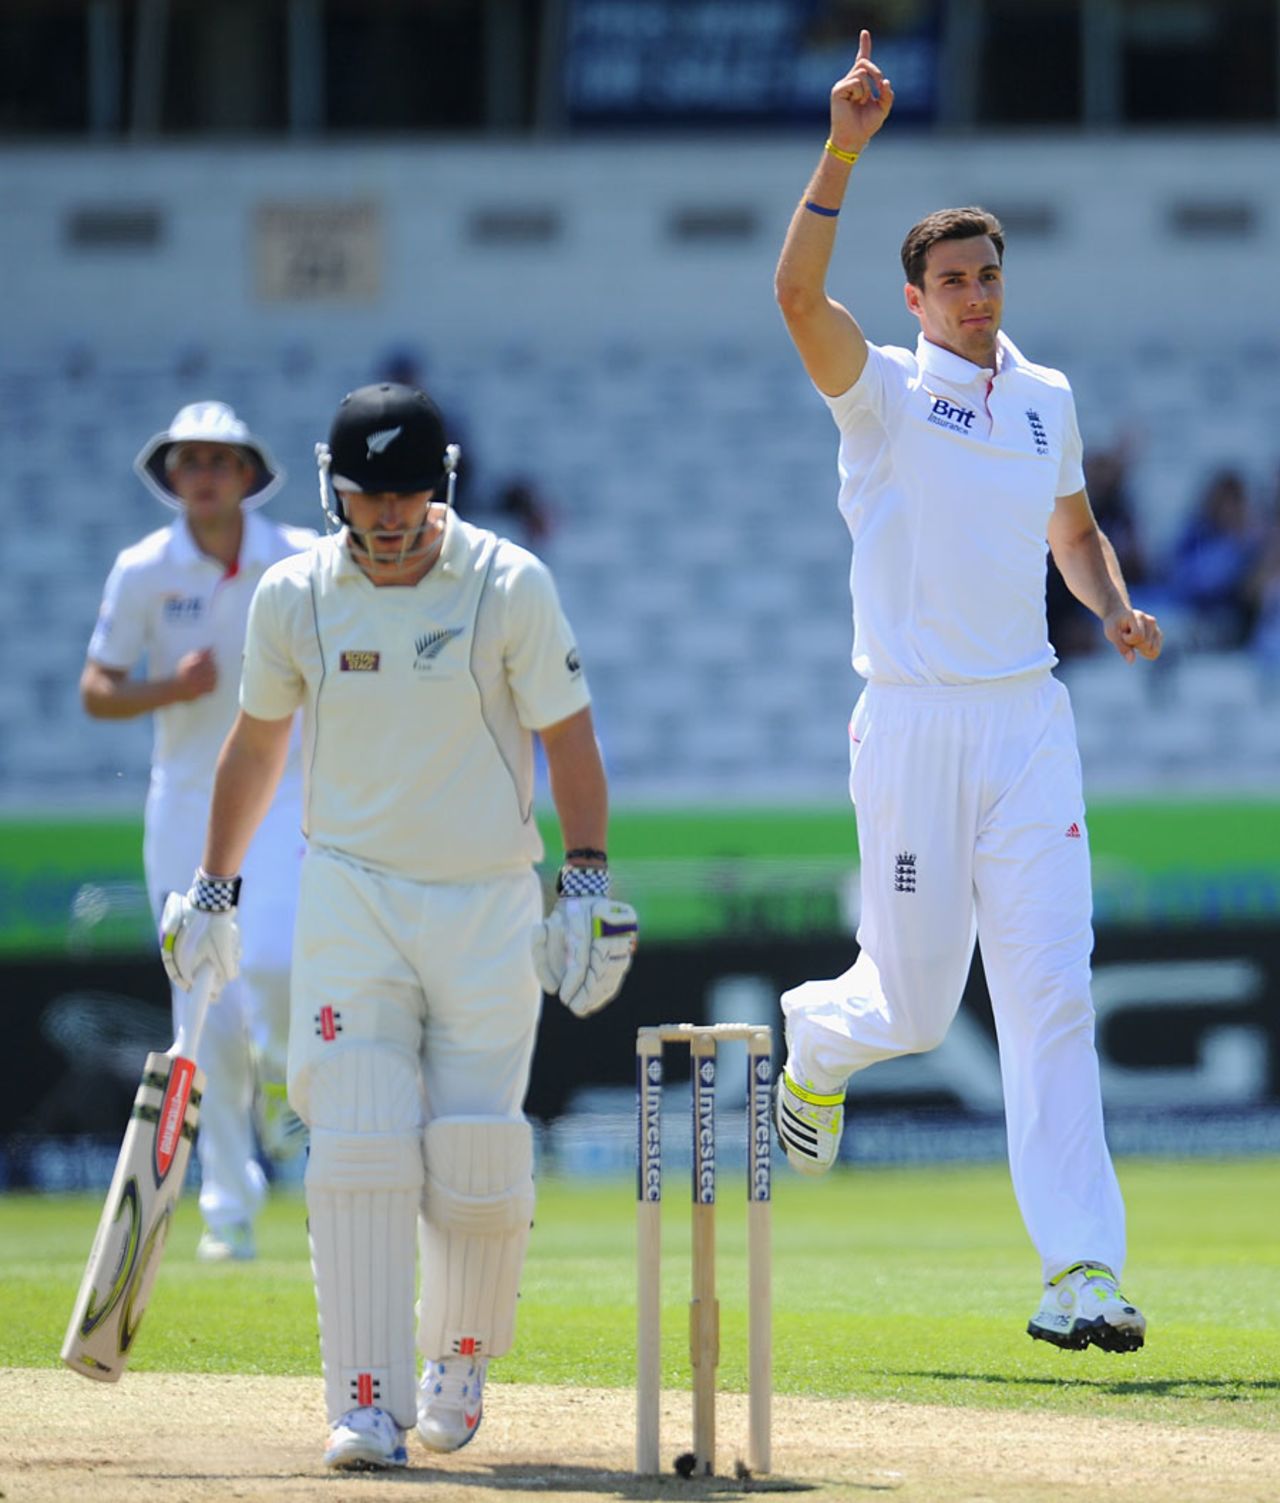 Steven Finn's second came moments before lunch, England v New Zealand, 2nd Investec Test, Headingley, 3rd day, May 26, 2013